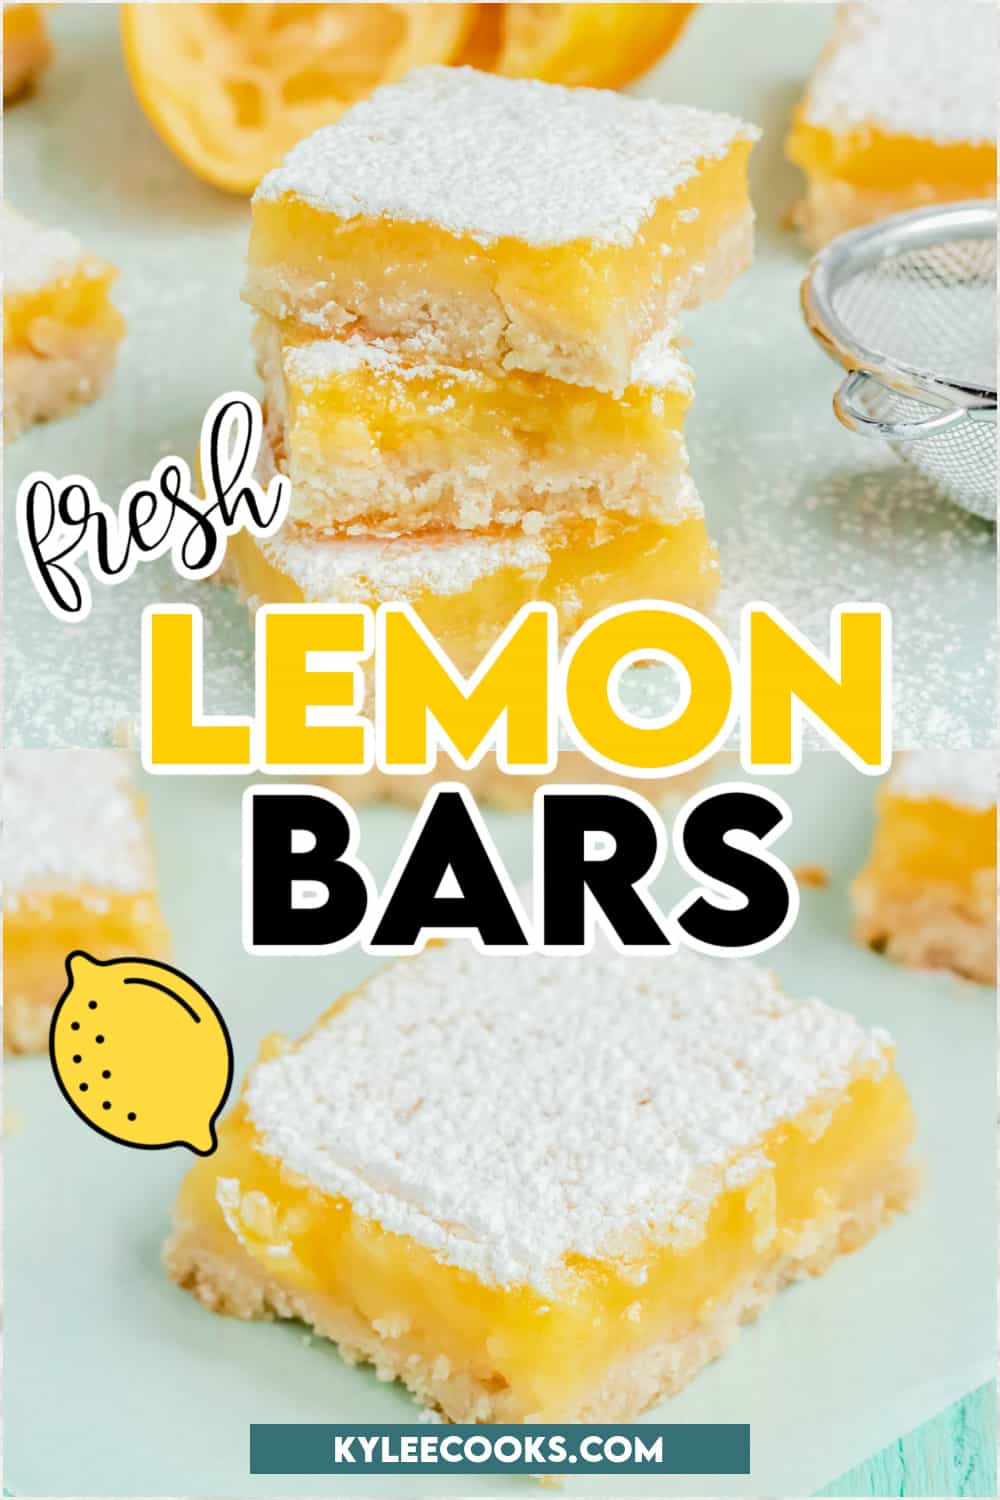 lemon bars with recipe ingredients and title overlaid in text.